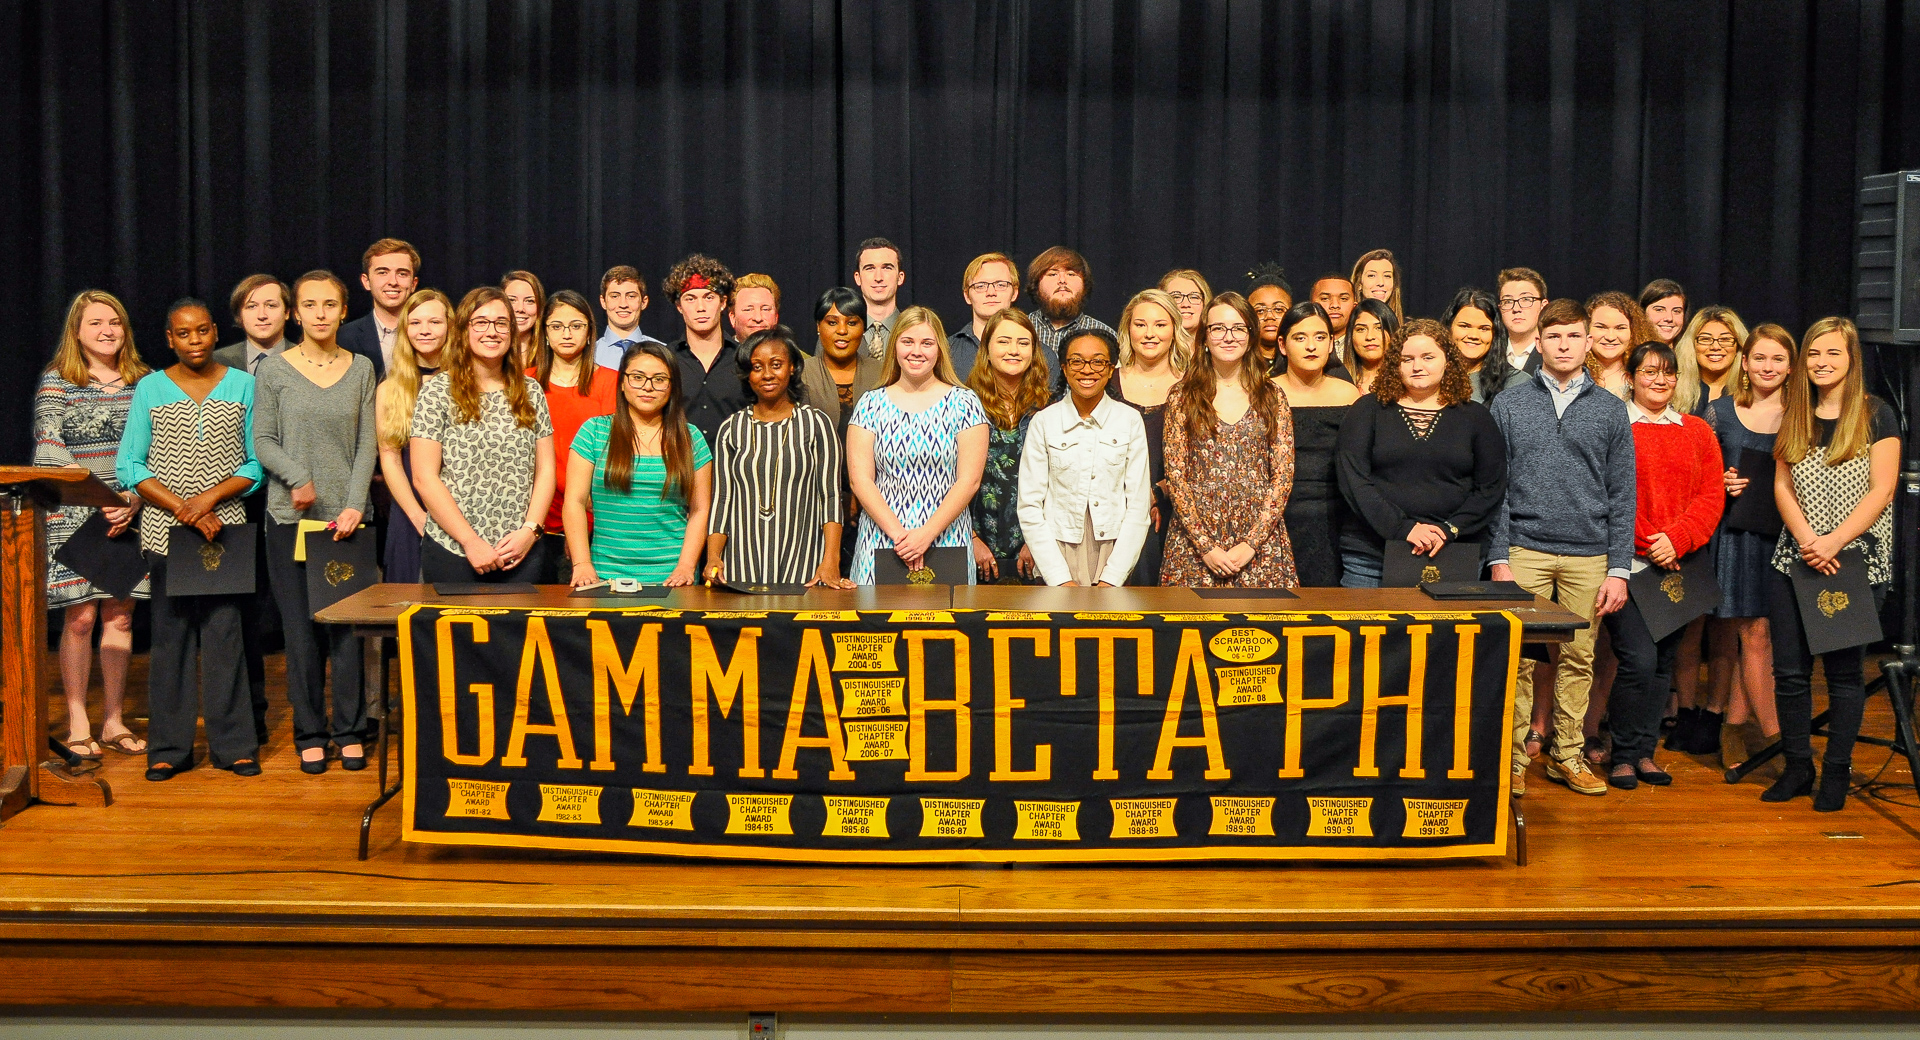 A large group behind a banner reading Gamma Beta Phi.